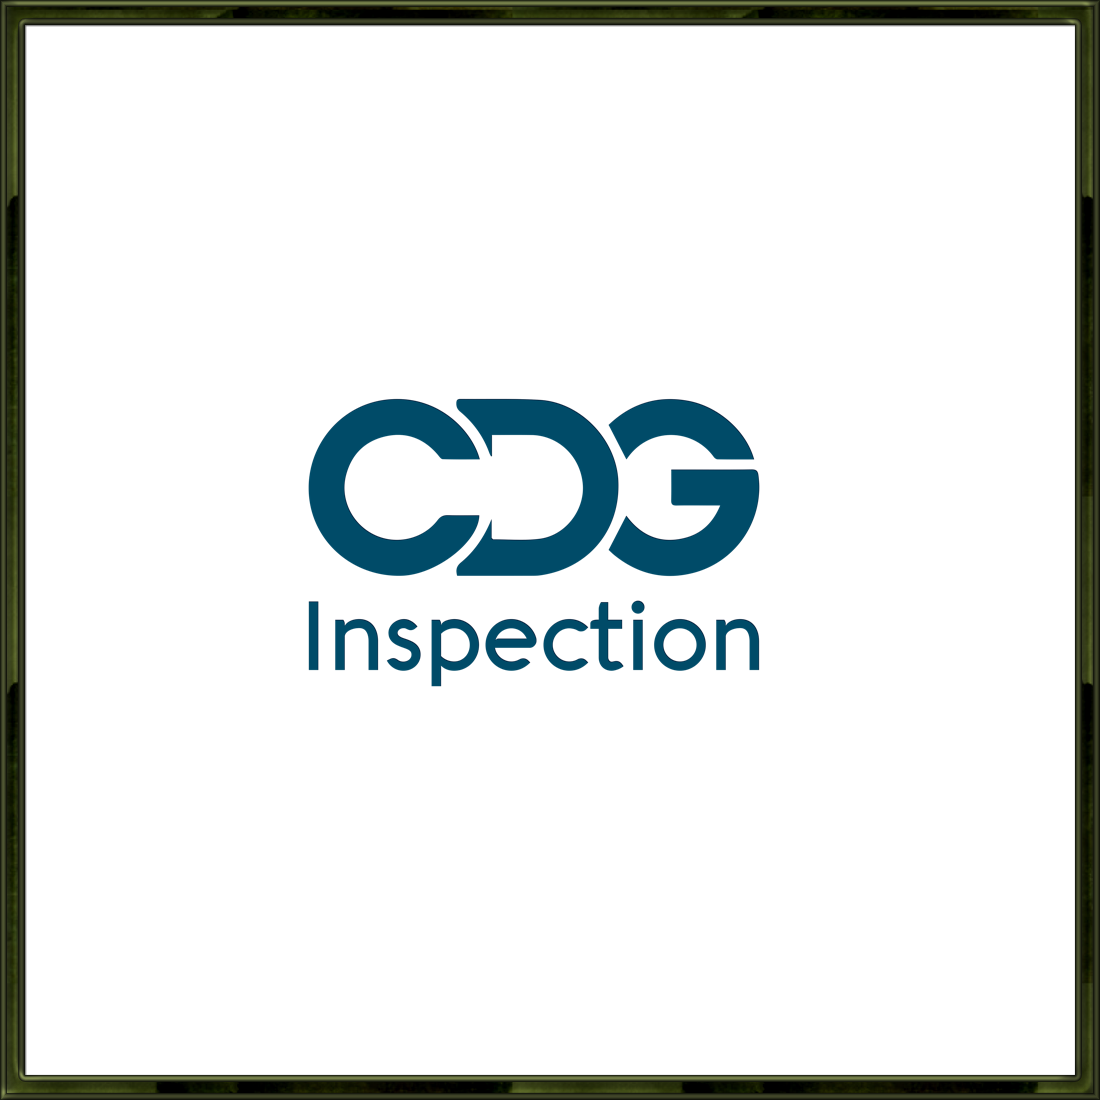 CDG Inspection Limited